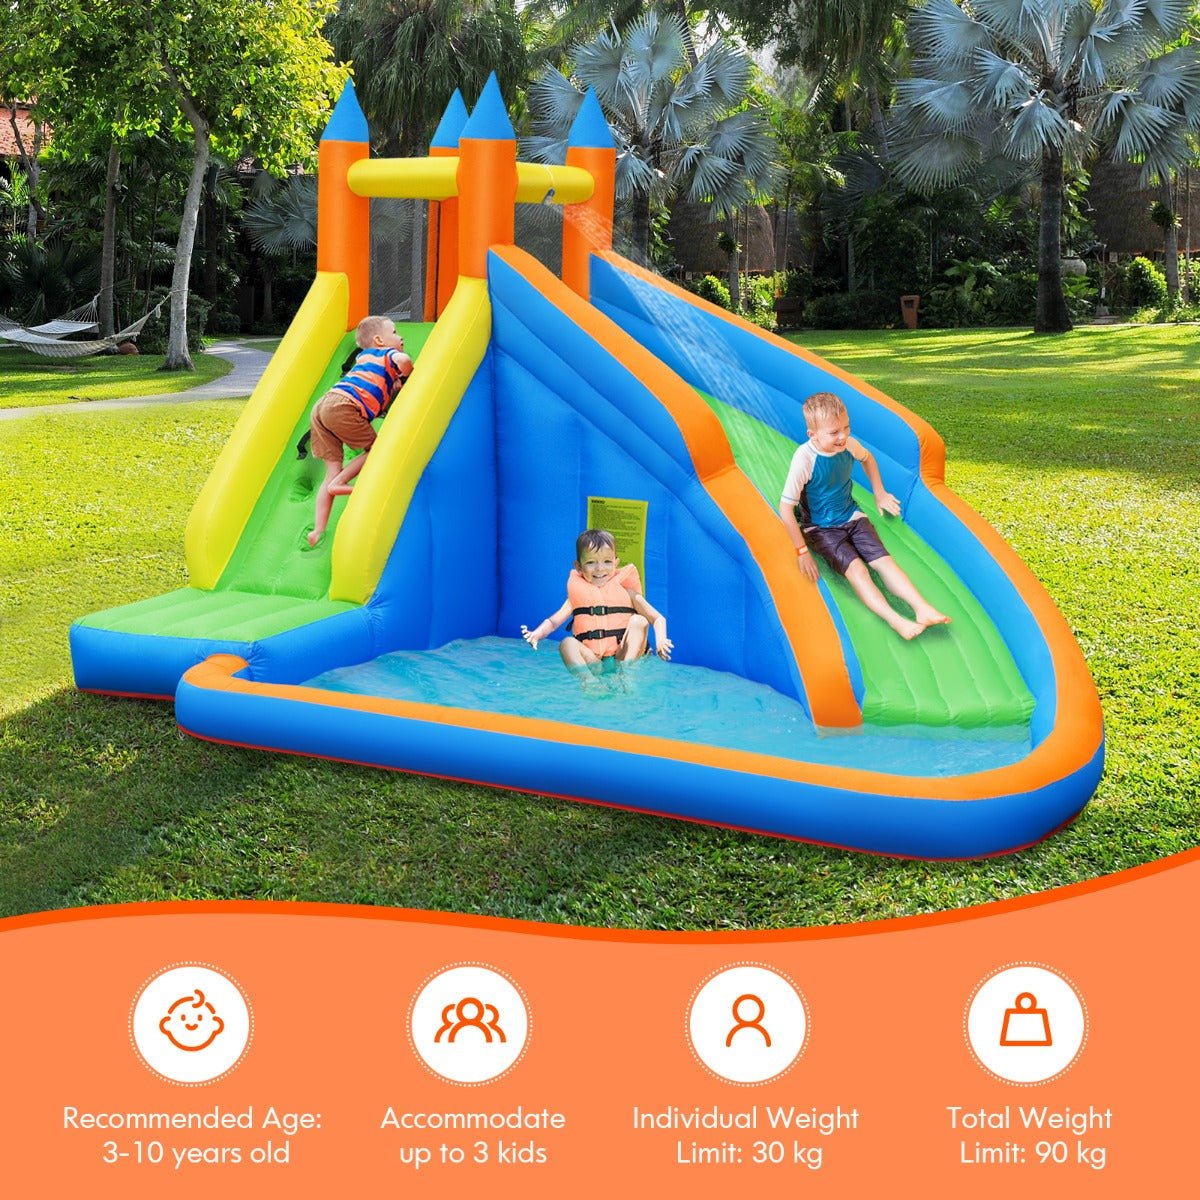 Slide, Climb, Splash, and Play with Our Ultimate Combo